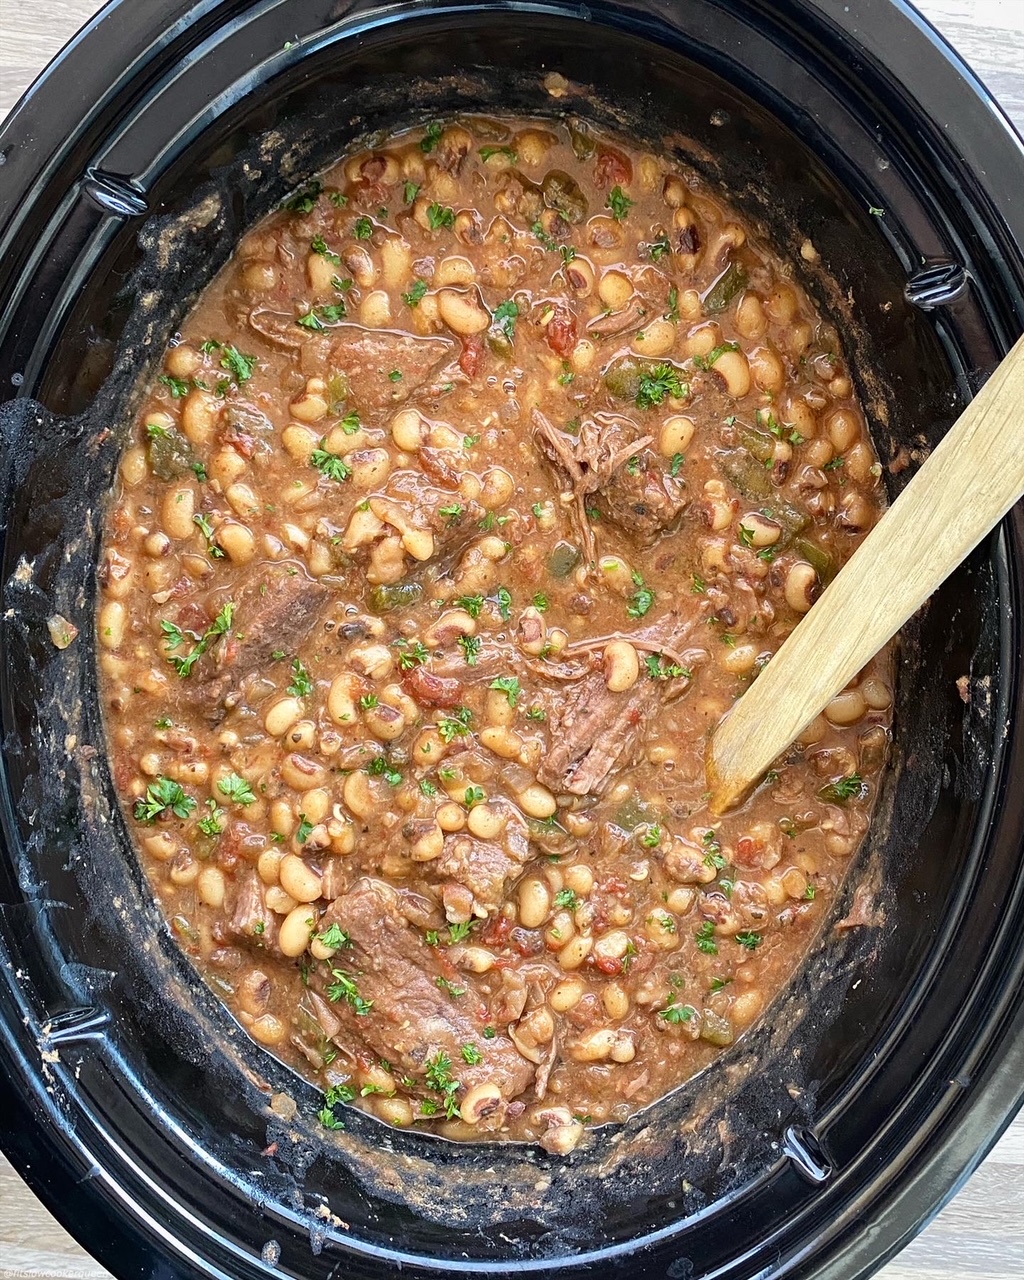 Slow Cooker Black Eyed Peas - Immaculate Bites